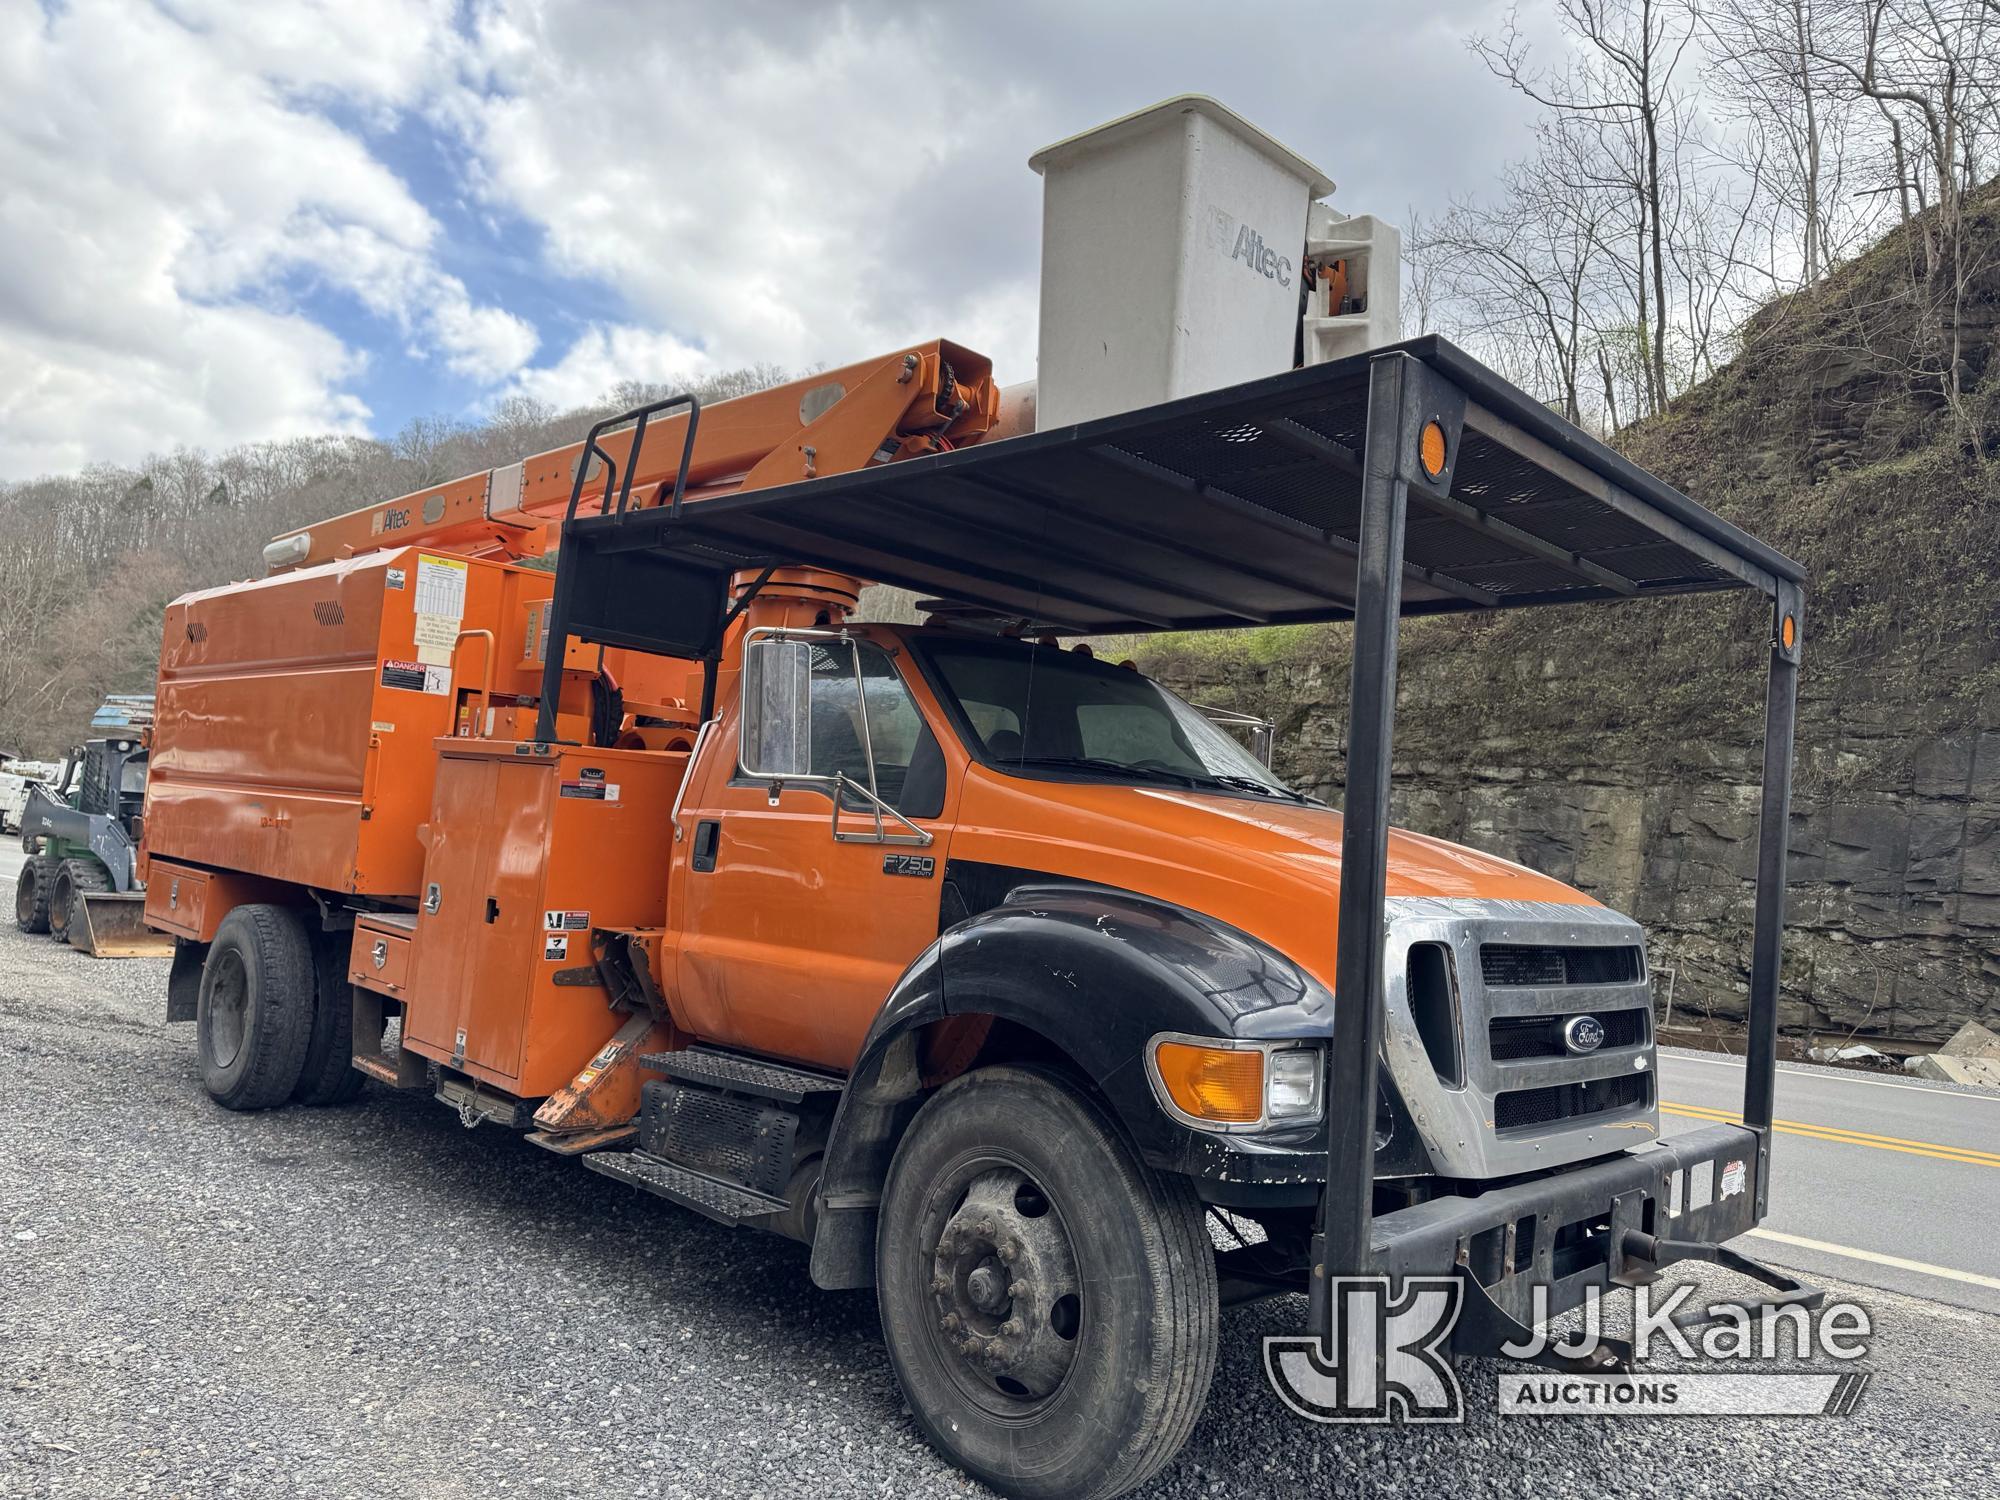 (Hanover, WV) Altec LRV60E70, Over-Center Elevator Bucket Truck mounted behind cab on 2011 Ford F750